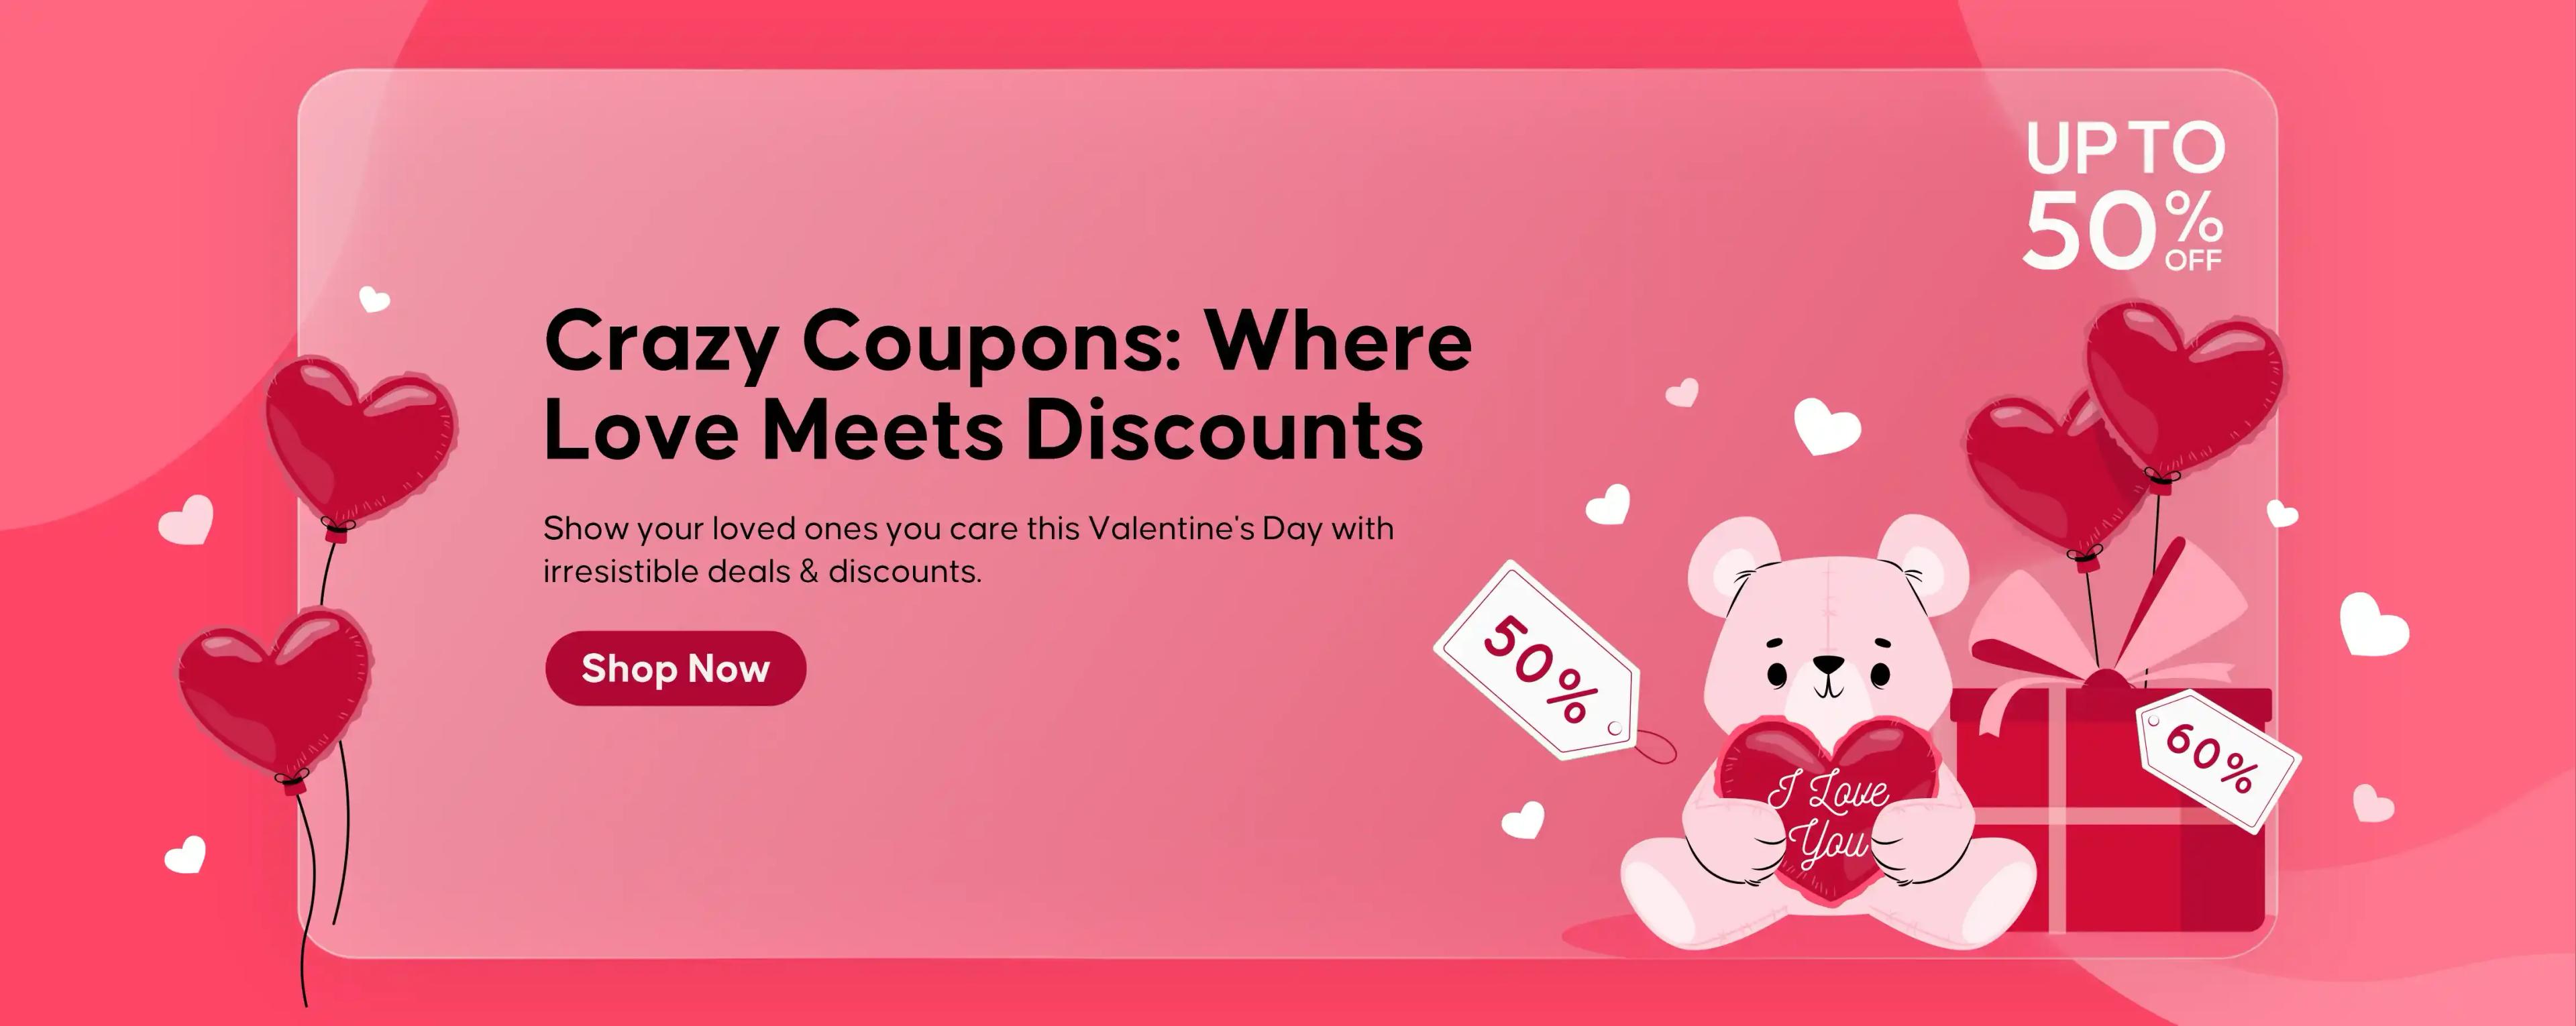 Crazy coupons: where love meets discount, valentine’s day discounts and offers